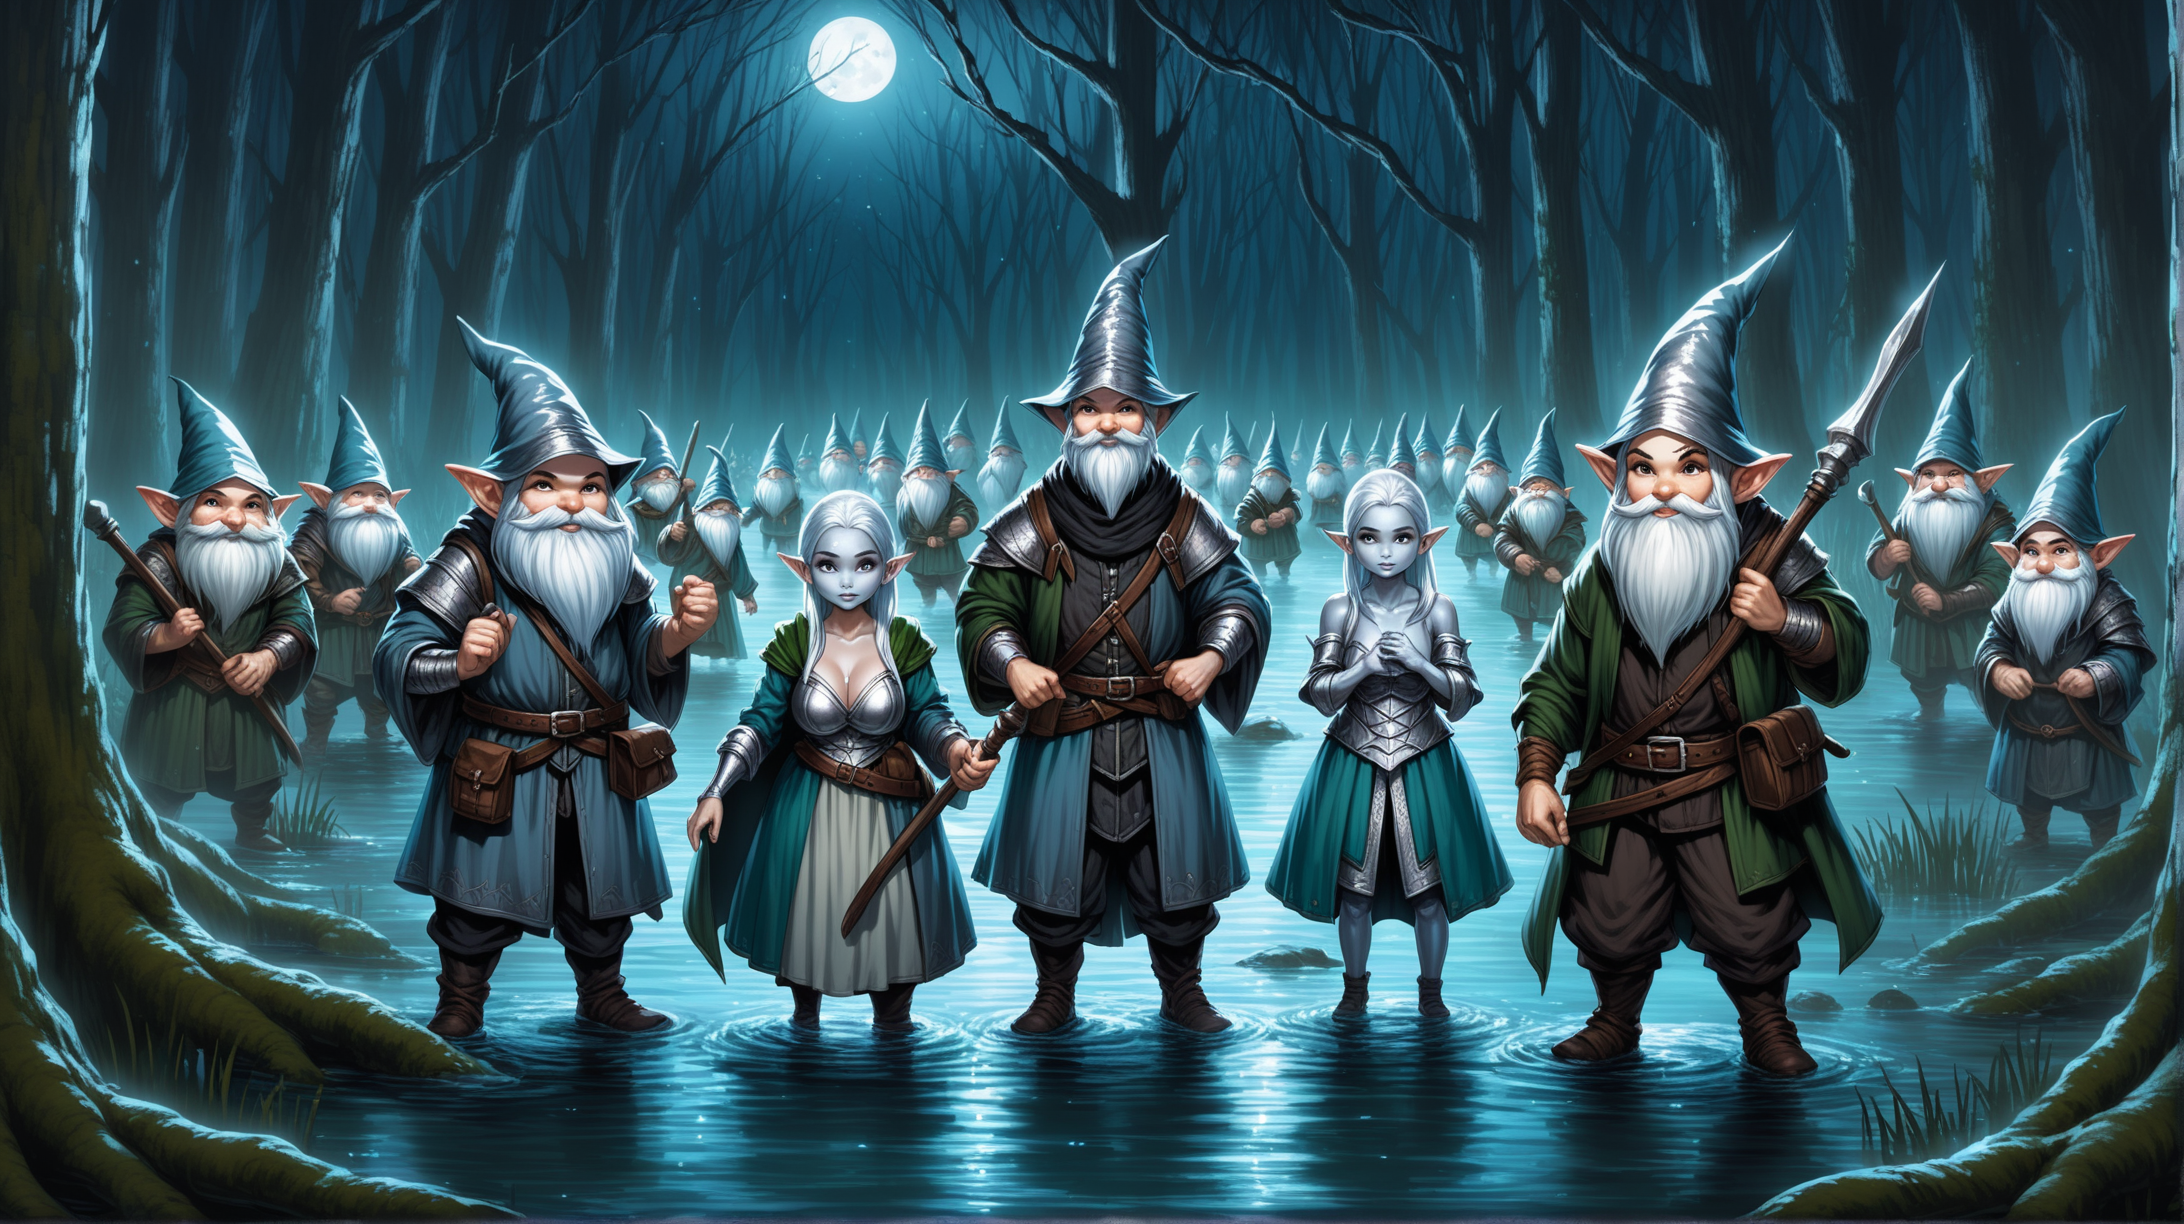 Medieval Fantasy Scene Silver Skin Gnomes Rogues and Wizards in Dark Swamp